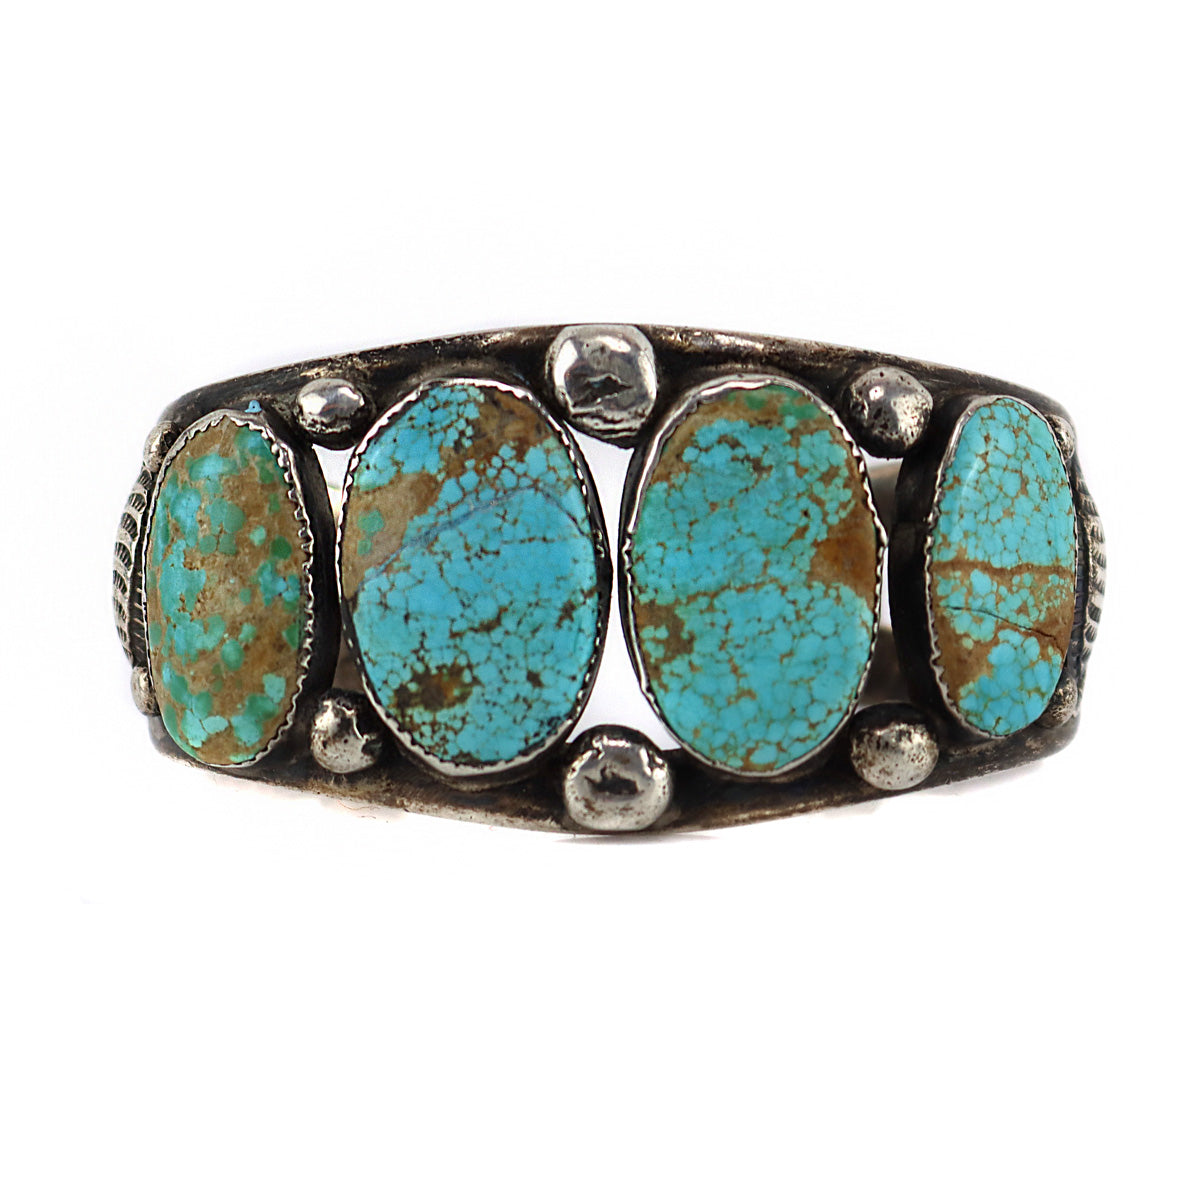 Navajo - Turquoise and Silver Bracelet c. 1930s, size 6.75 (J16126)